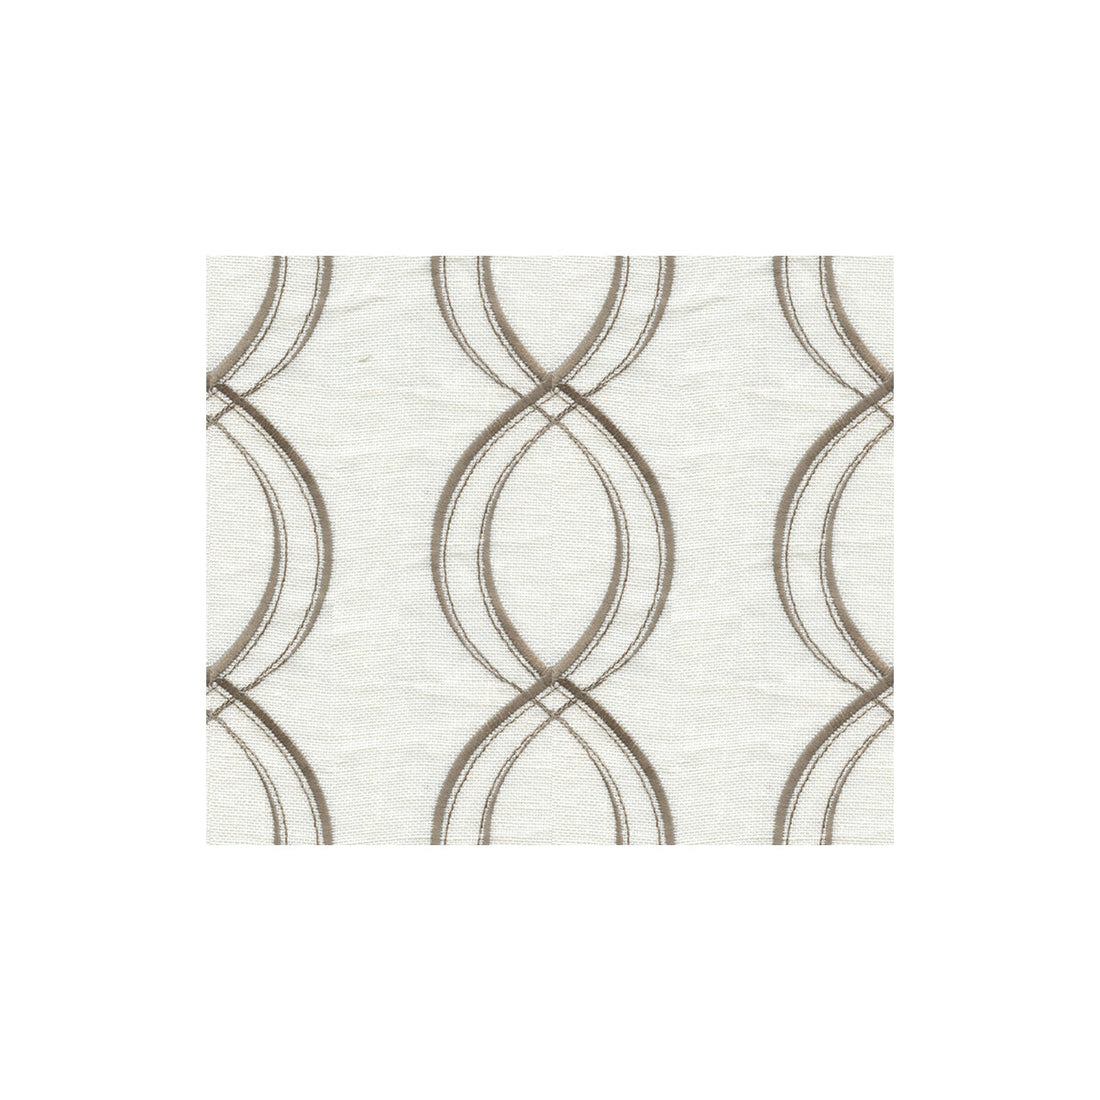 Joy fabric in heather color - pattern 9580.11.0 - by Kravet Basics in the Candice Olson collection